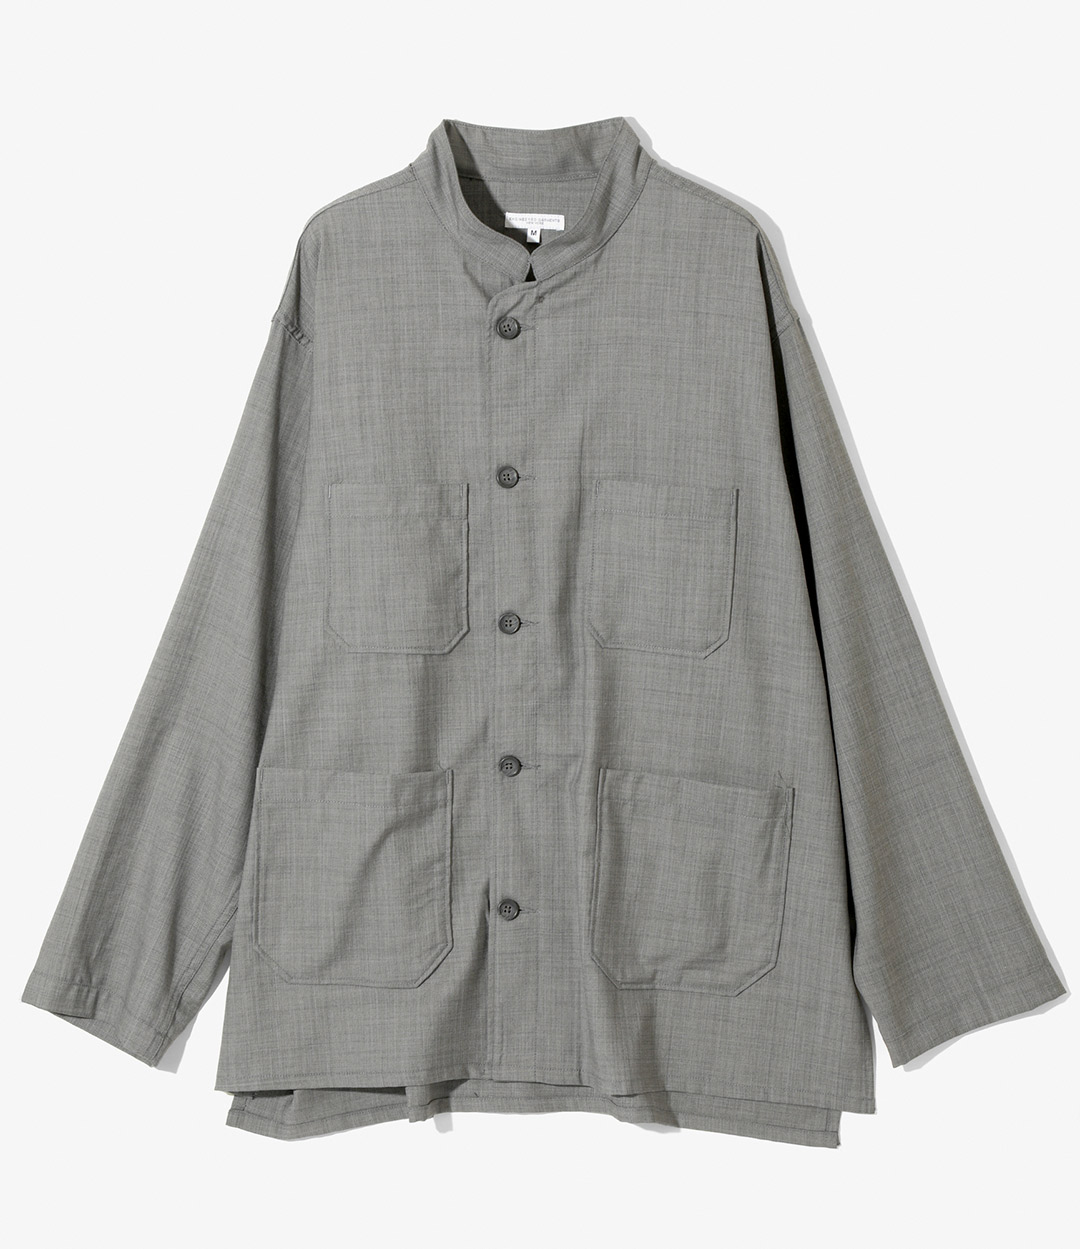 〈ENGINEERED GARMENTS〉NEPENTHES限定アイテム